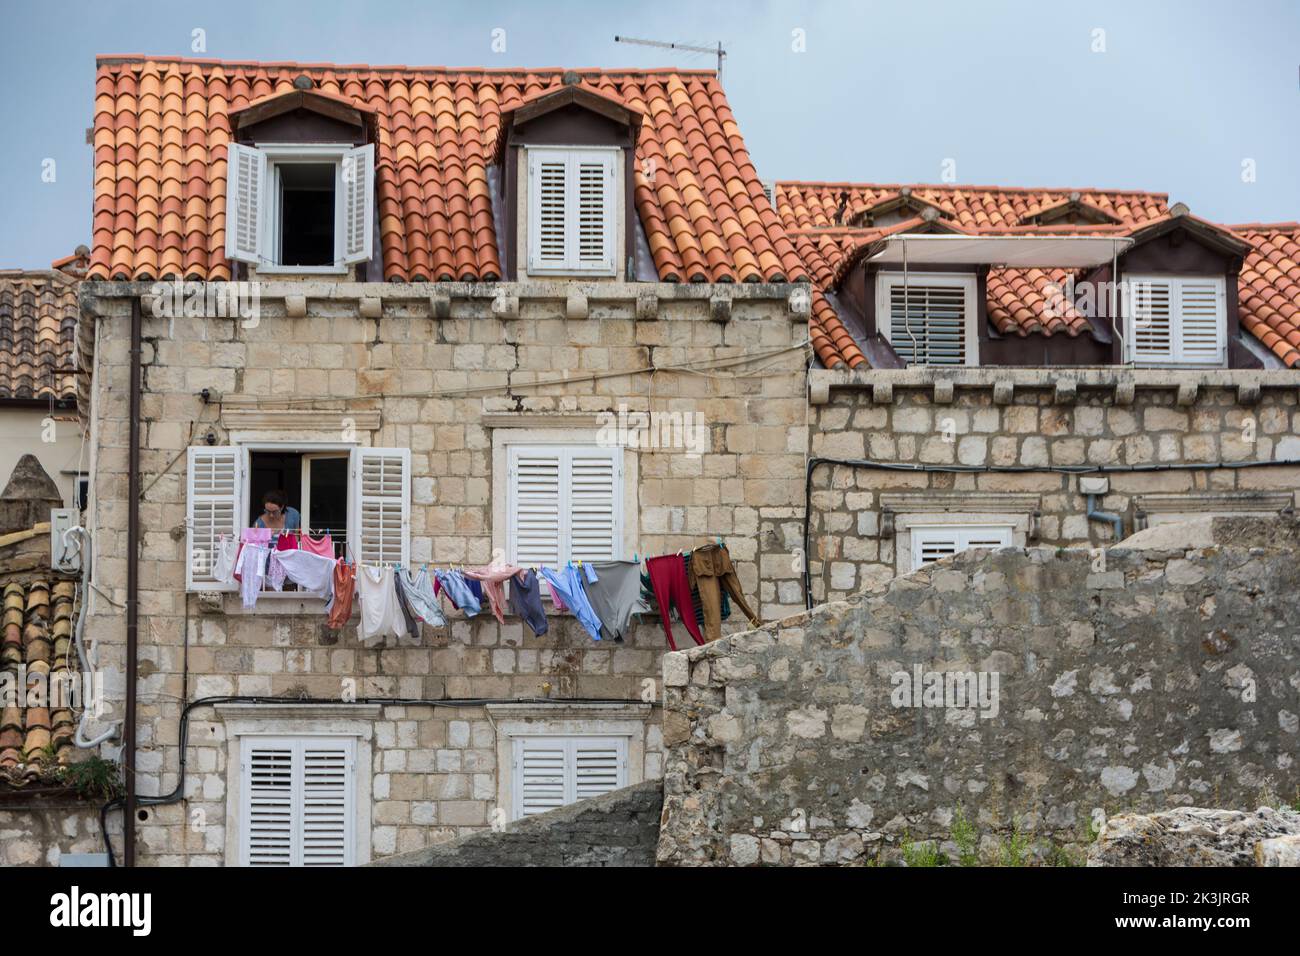 Woman hanging the laundry on a washing line outside a window with white shutters.Old town of Dubrovnik, Croatia Stock Photo